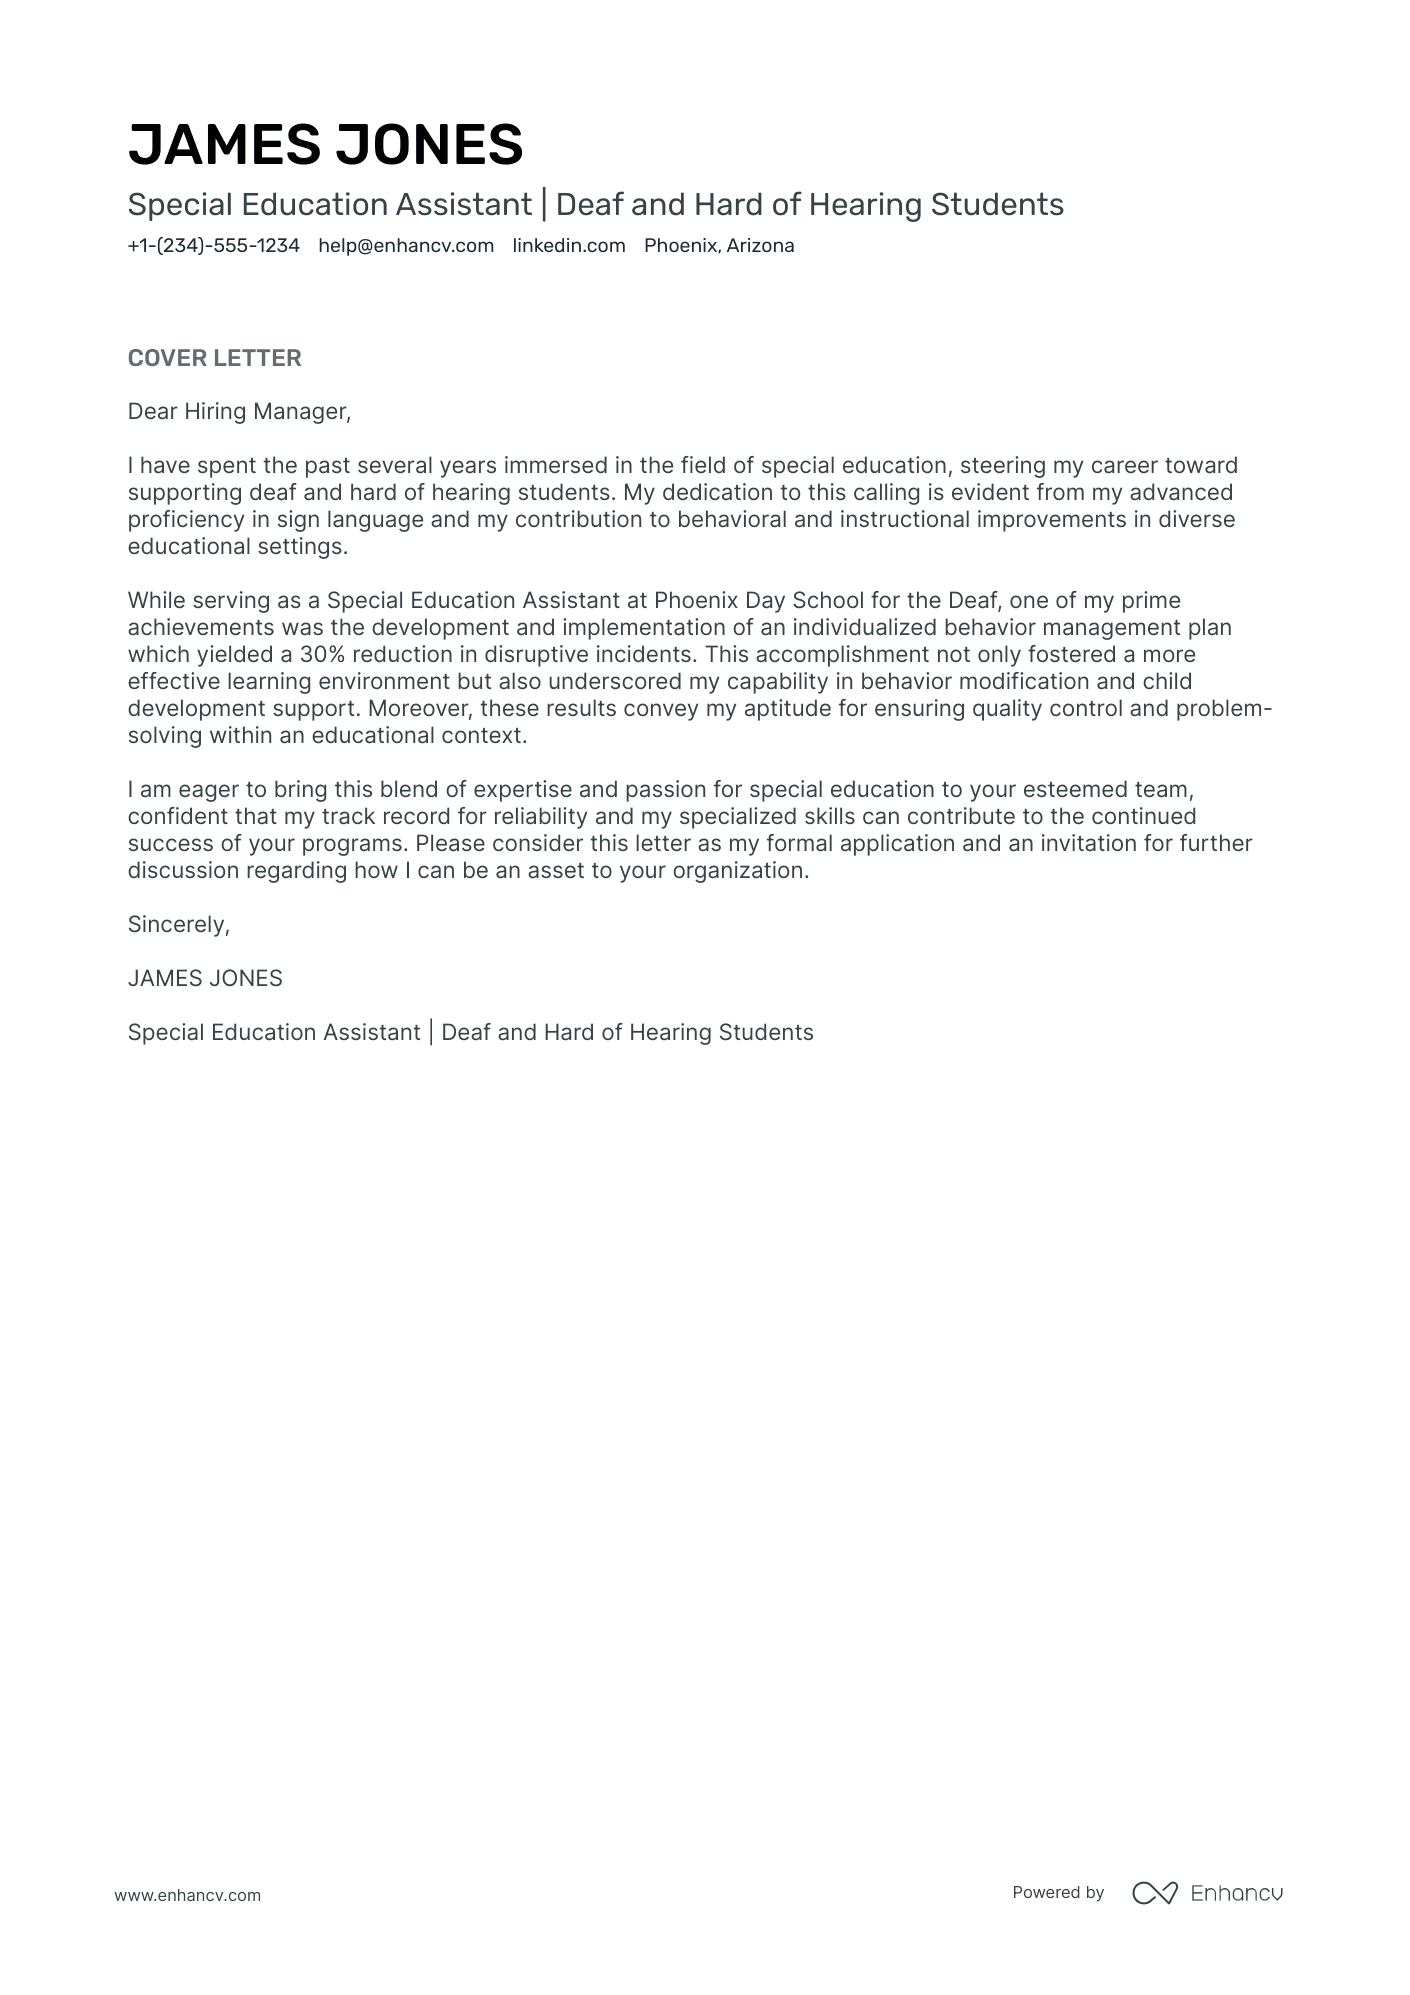 example of teacher assistant cover letter